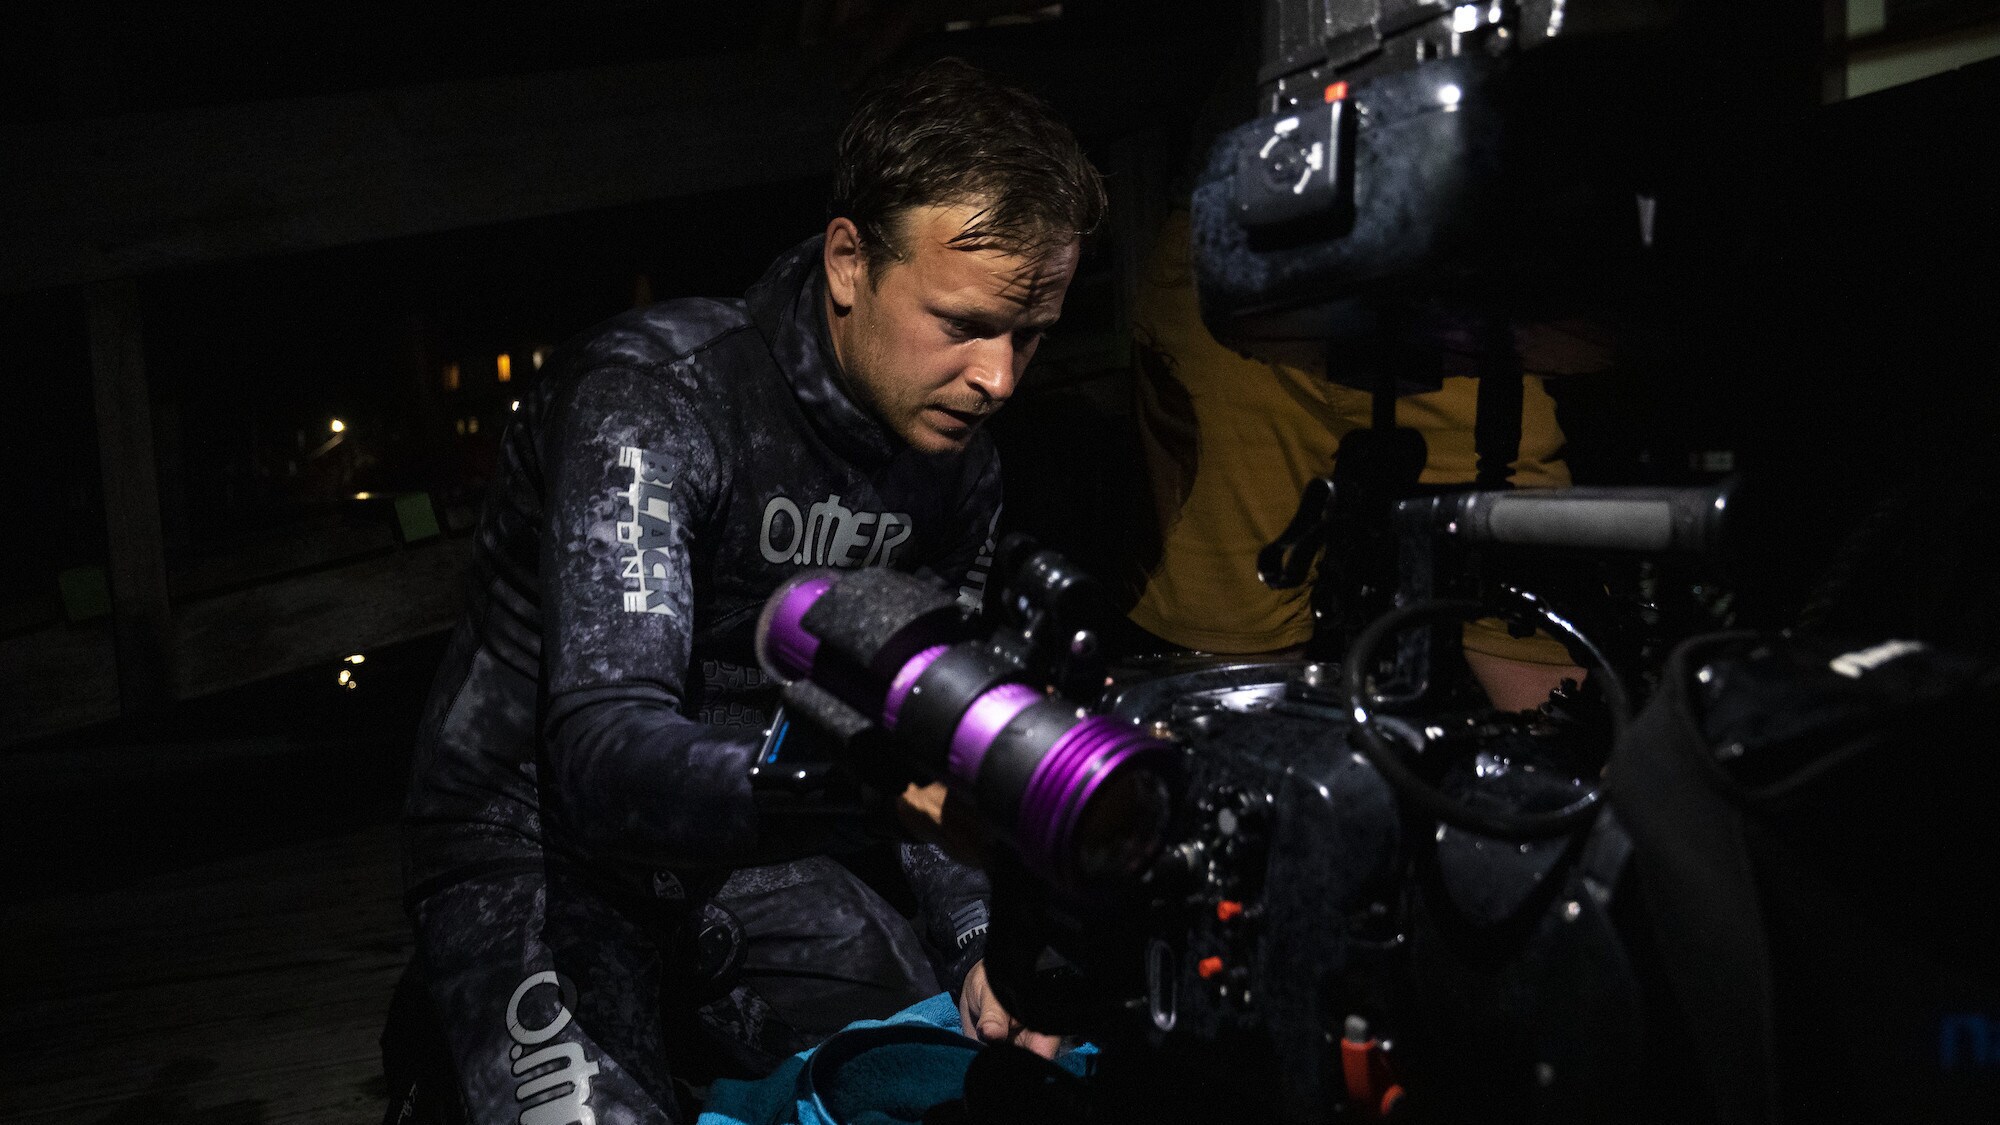 Bertie Gregory with his kit at night. (National Geographic for Disney+/Anna Dimitriadis)